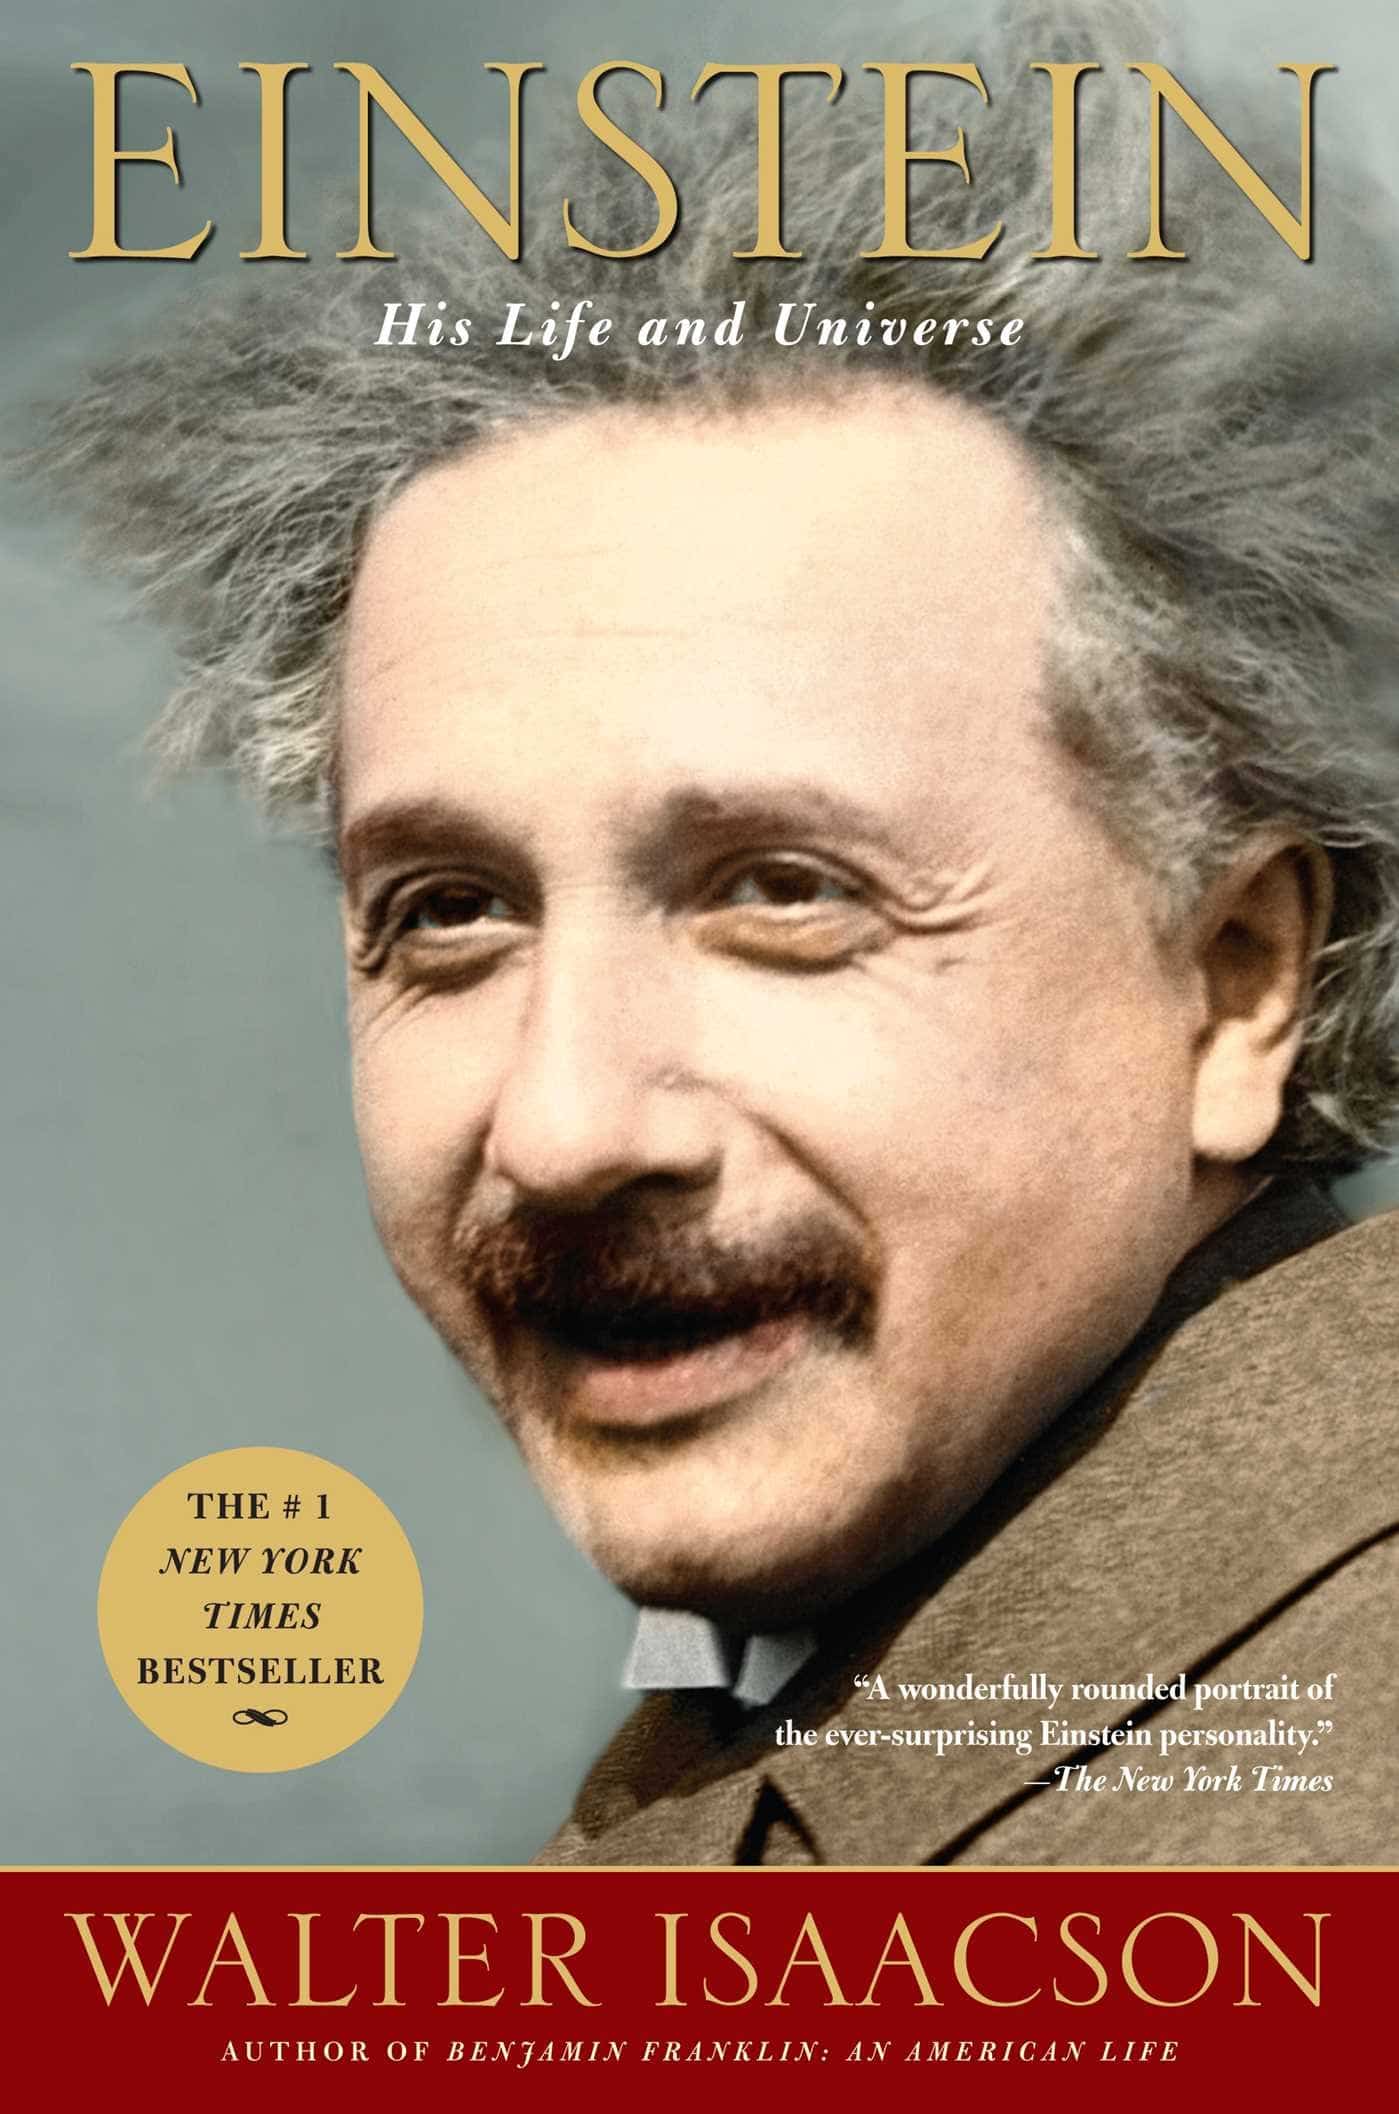 The cover of Einstein